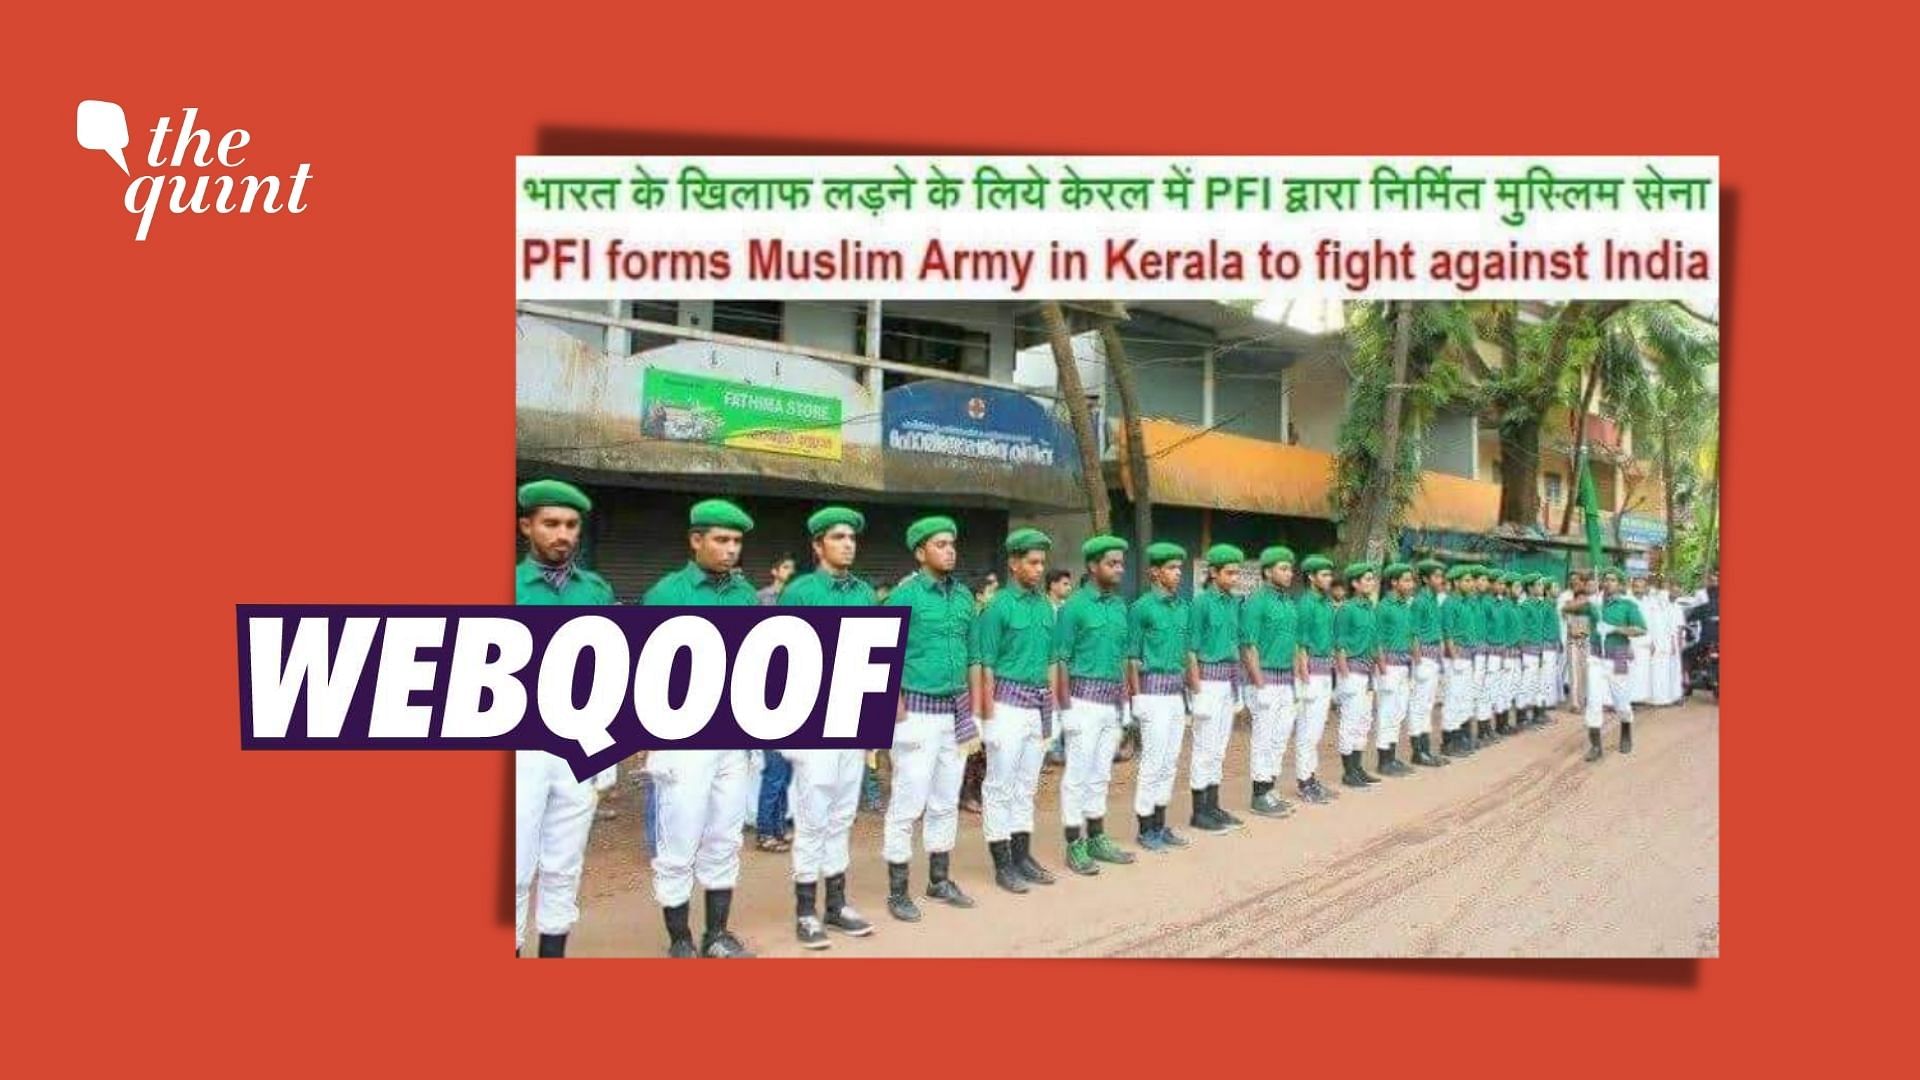 <div class="paragraphs"><p>Social media is rife with an image of men standing in a uniform with a claim that they are members of an army of Muslims built by the Popular Front of India.&nbsp;</p></div>